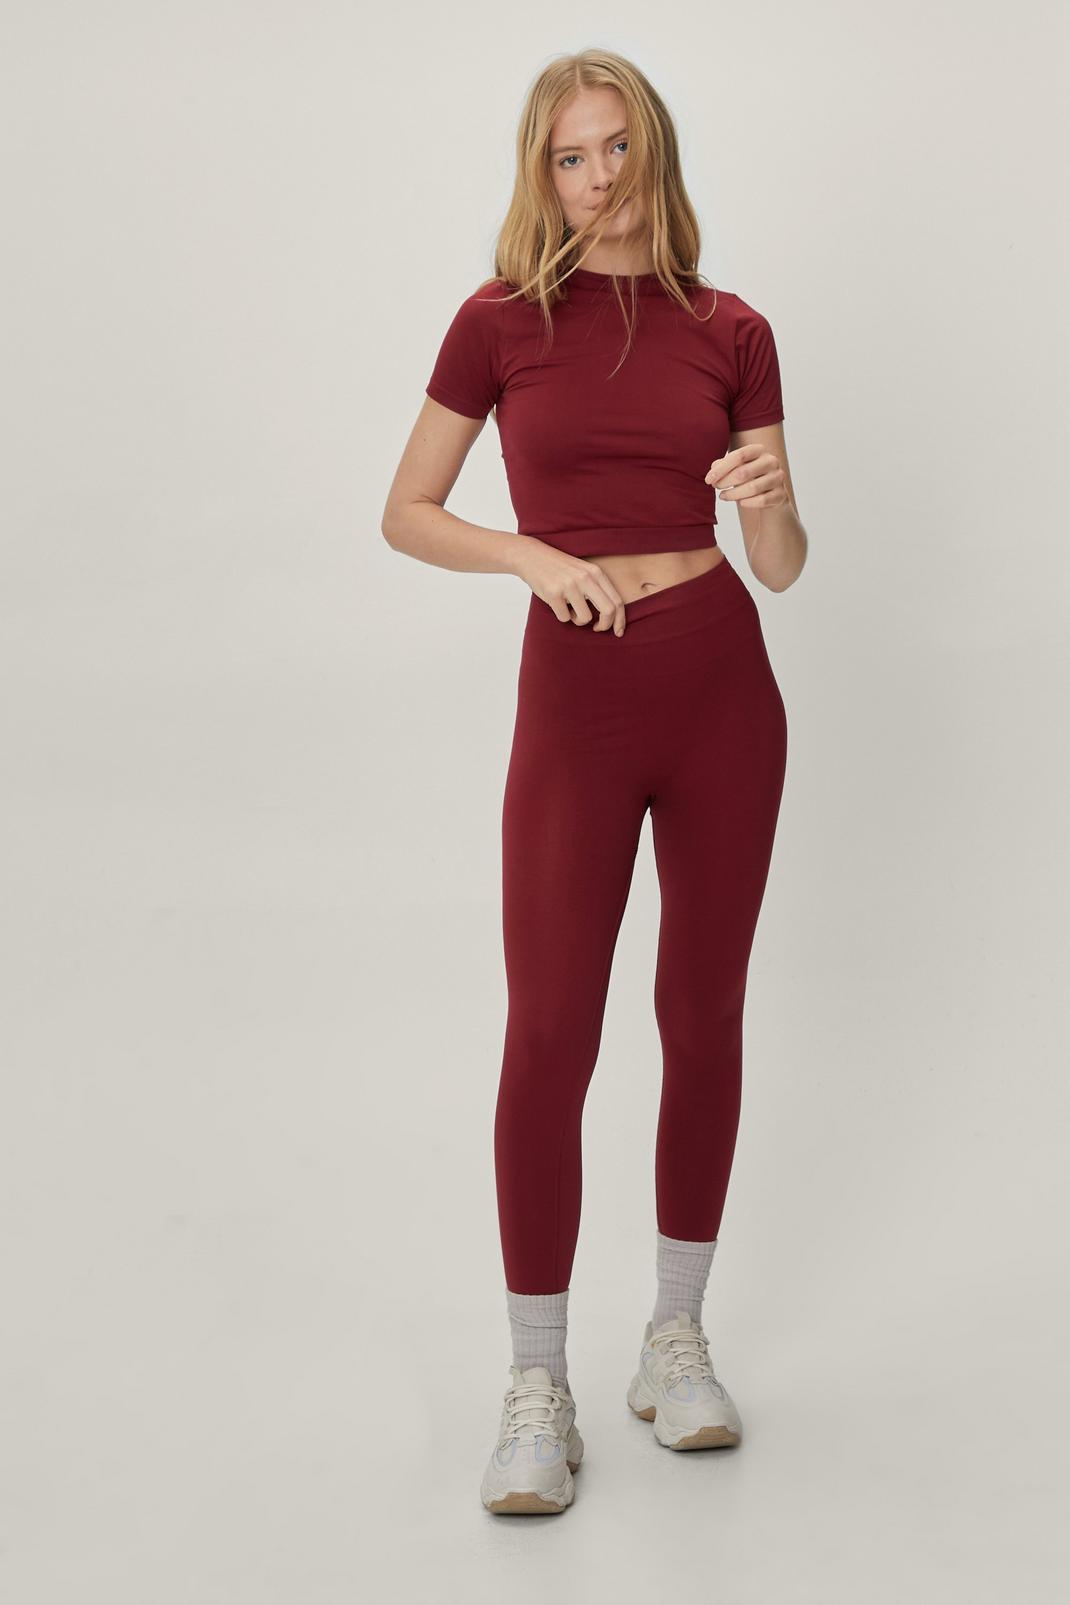 157 Sculpted Seamless Short Sleeve Top and Leggings Set image number 2